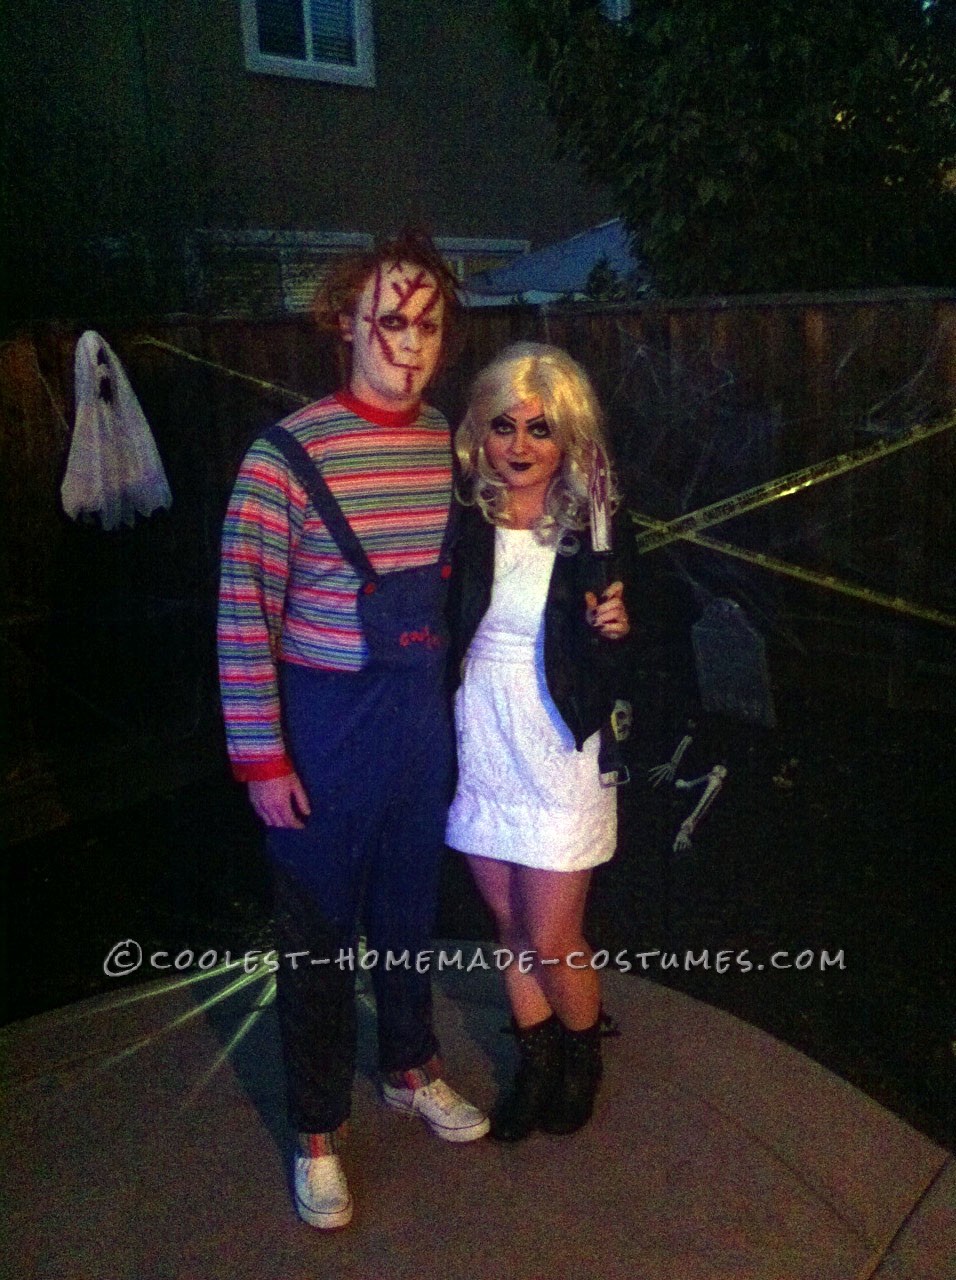 Coolest Homemade Chuckie and Bride of Chuckie Couple Costume